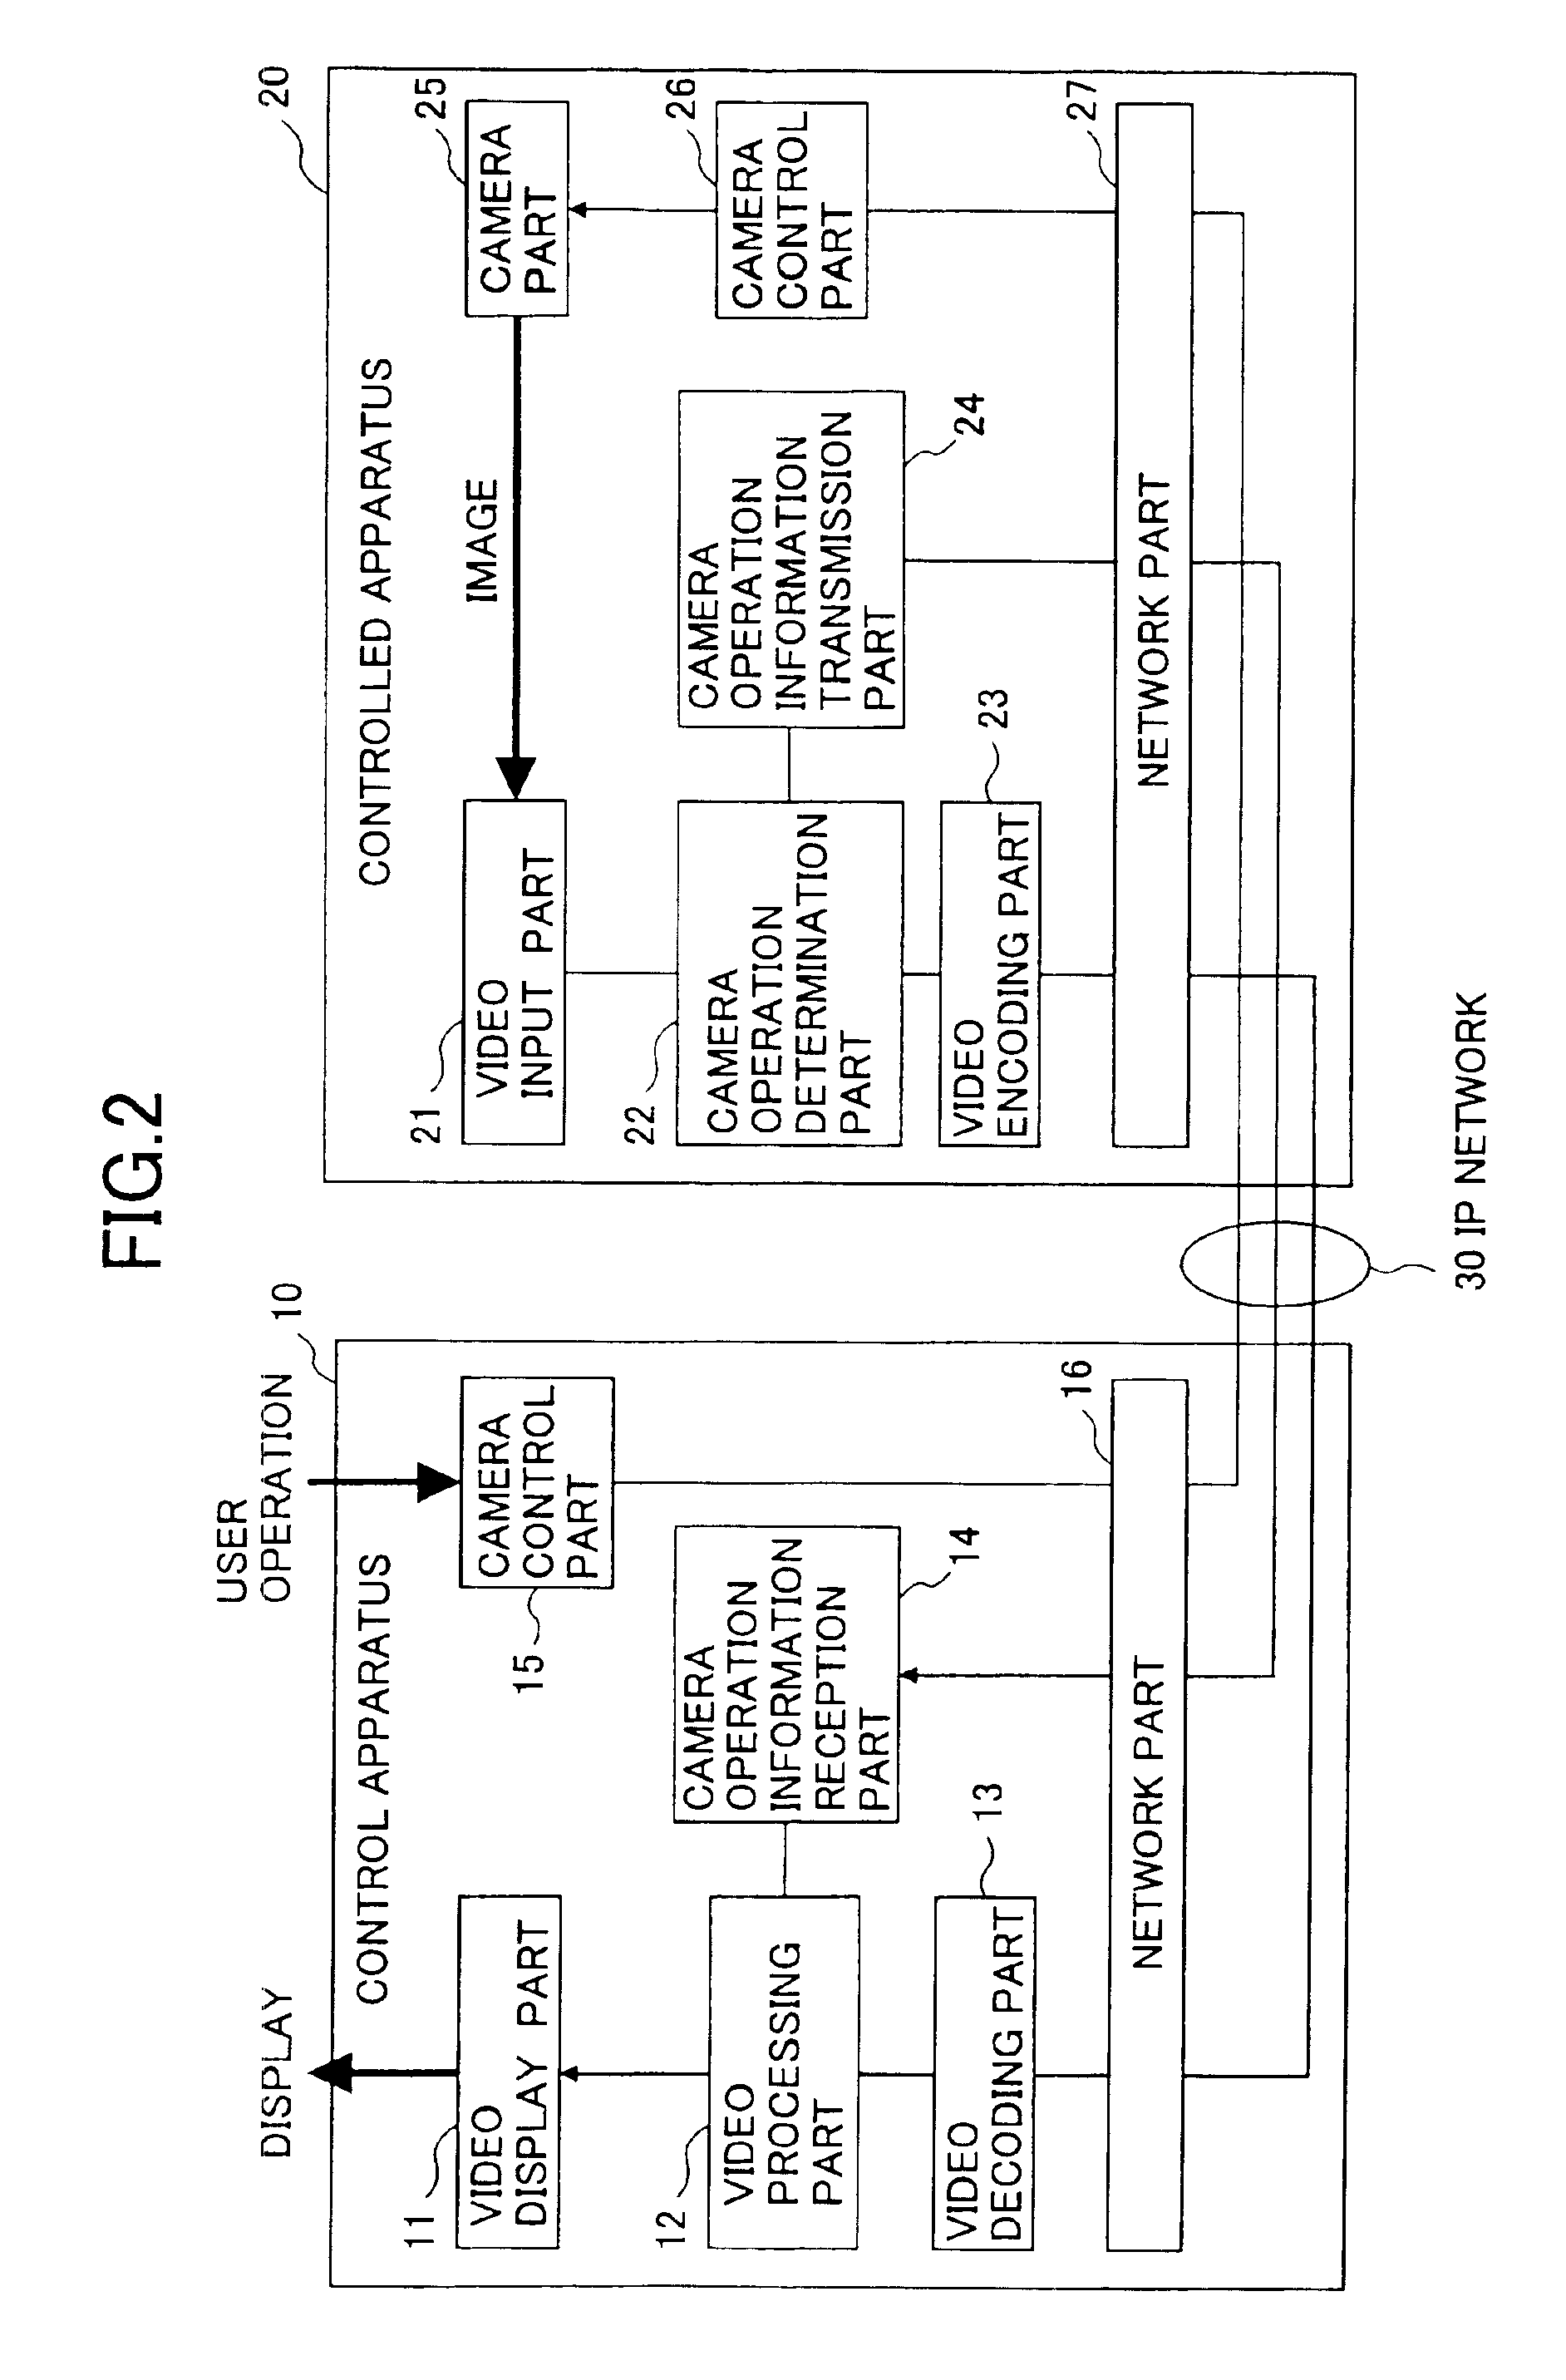 Image display control system reducing image transmission delay